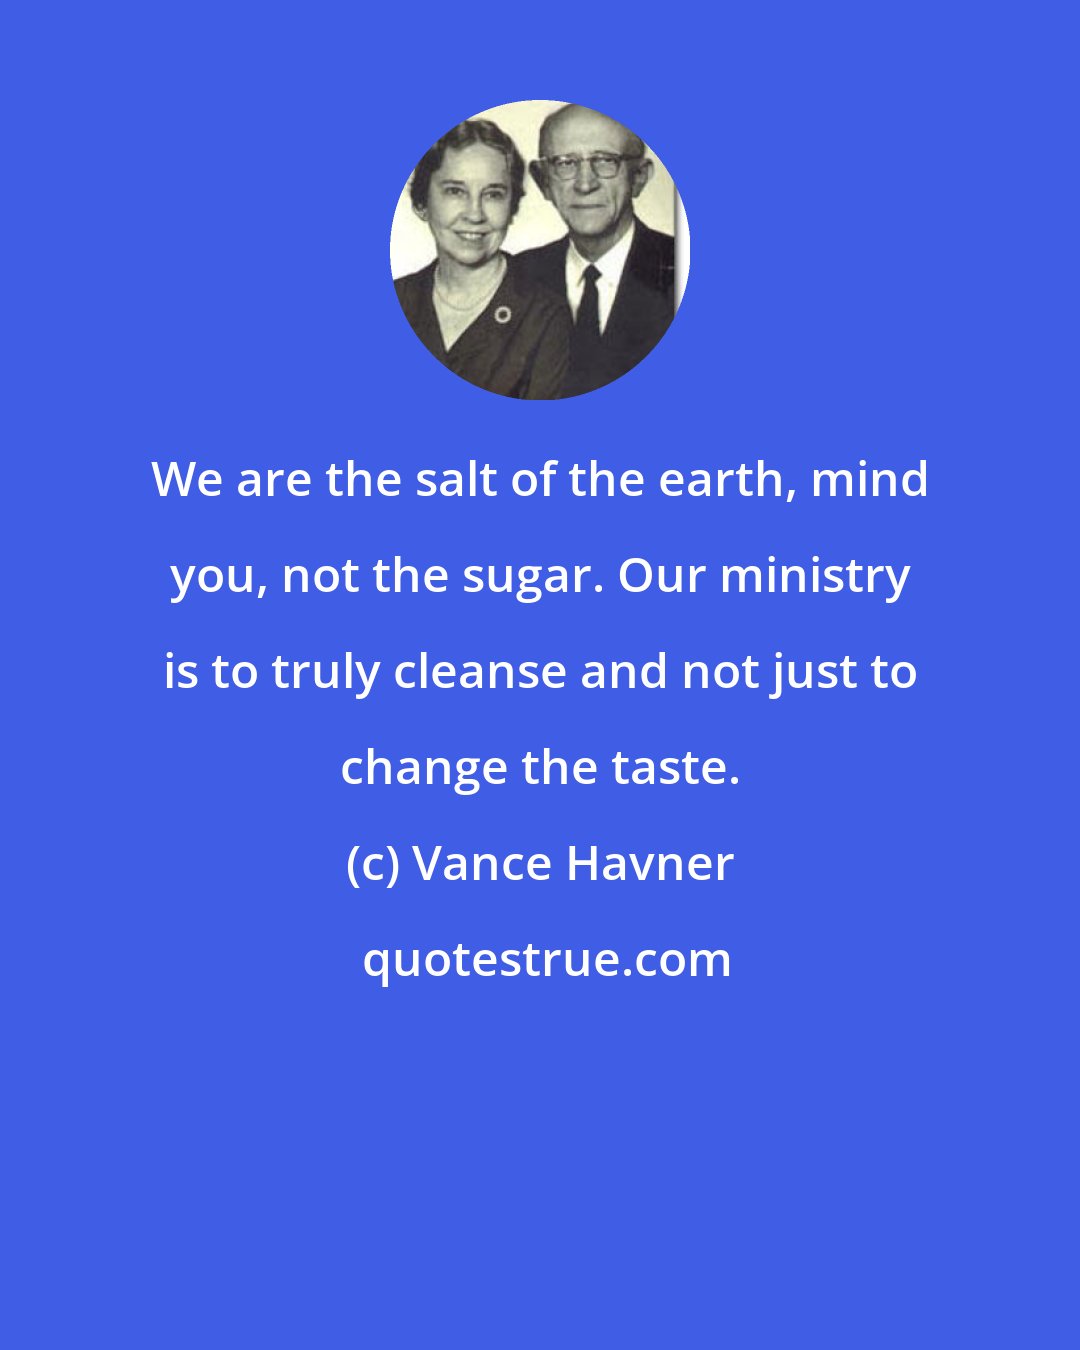 Vance Havner: We are the salt of the earth, mind you, not the sugar. Our ministry is to truly cleanse and not just to change the taste.